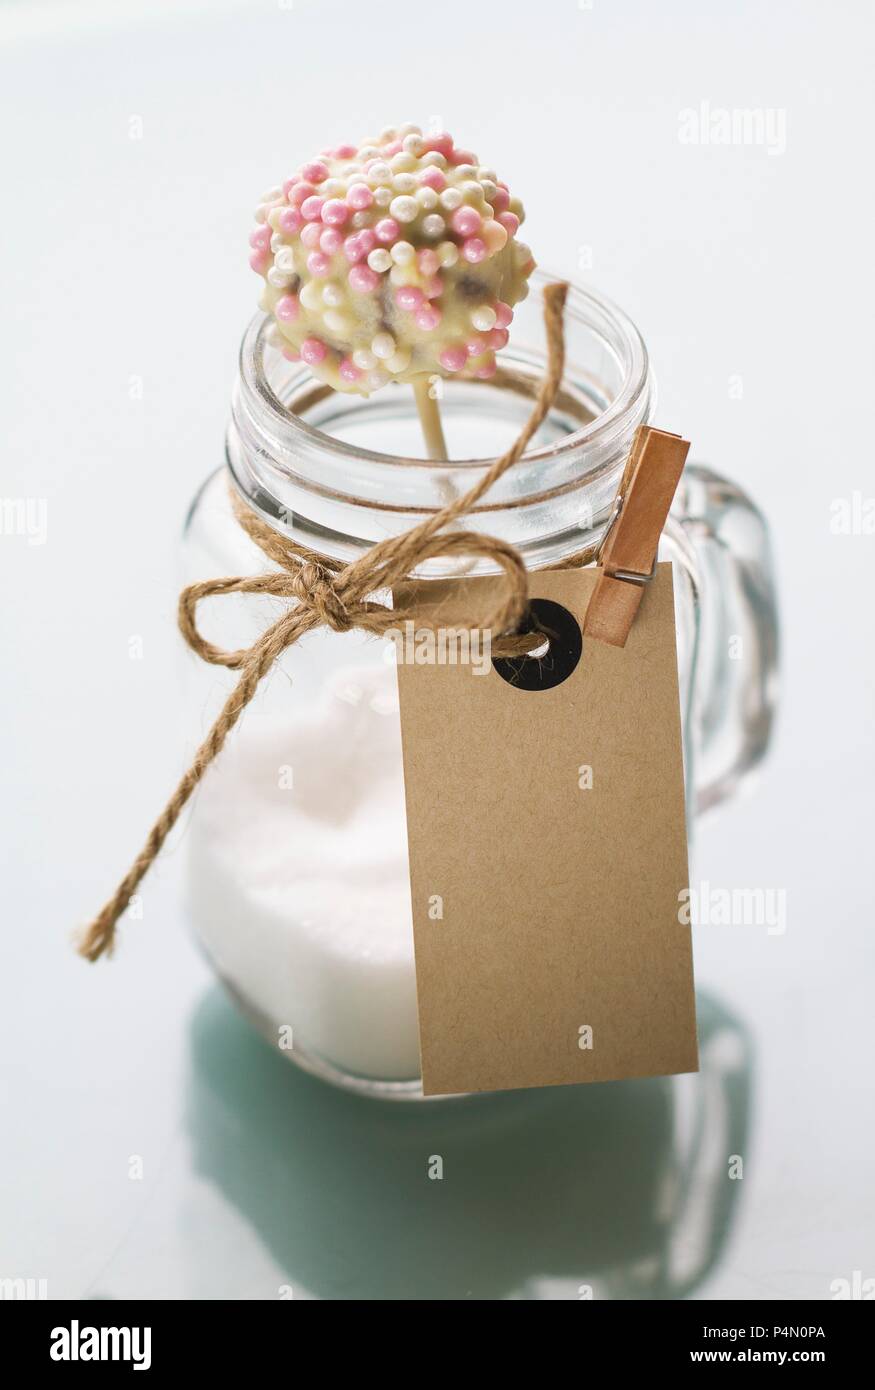 Cake pops with a white chocolate glaze and sugar beads Stock Photo